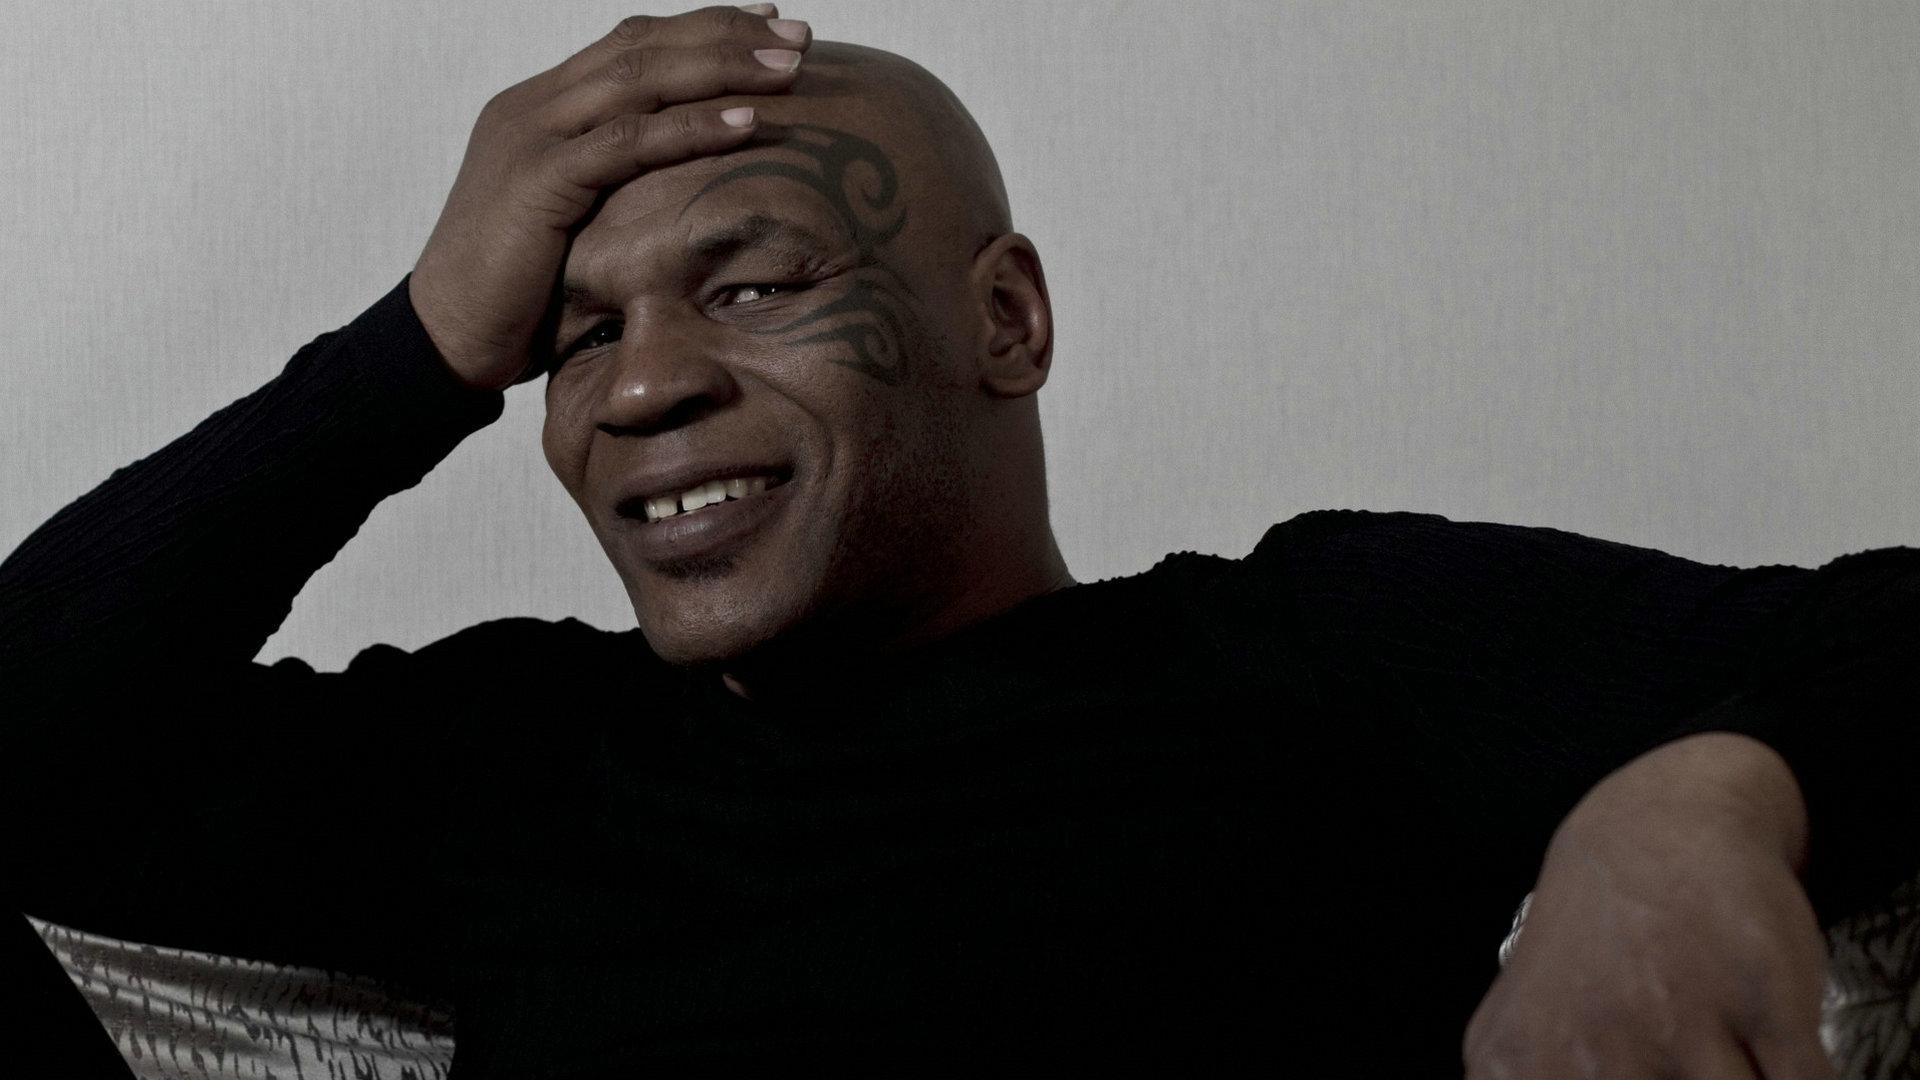 celebrity, mike tyson, actor, american, boxer, tattoo